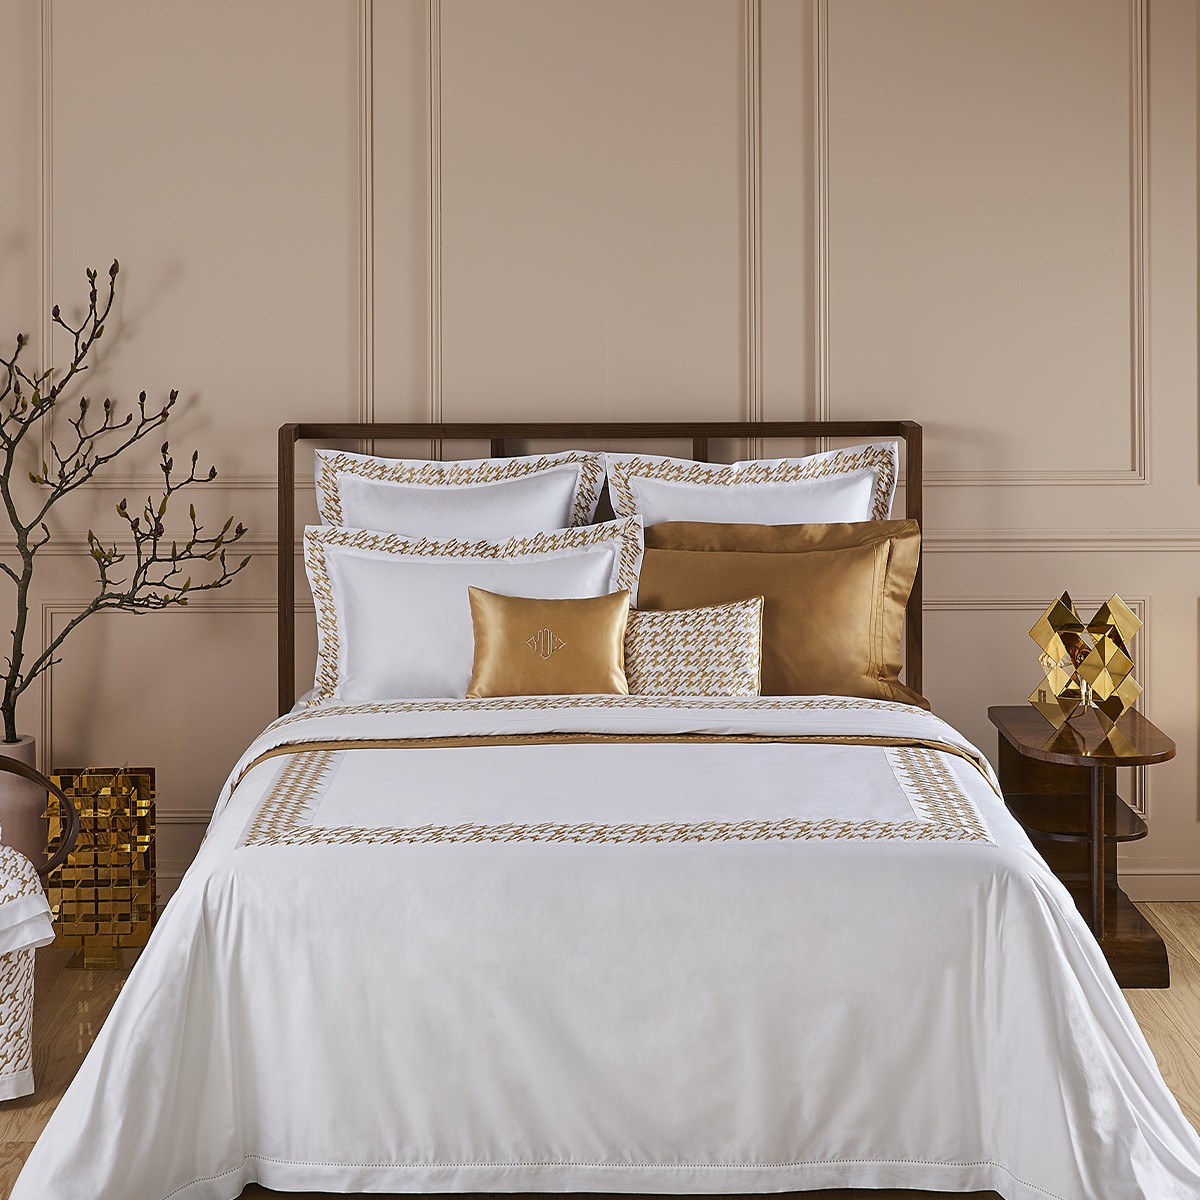 Yves Couture Collection Bed | Linen Delorme Alto